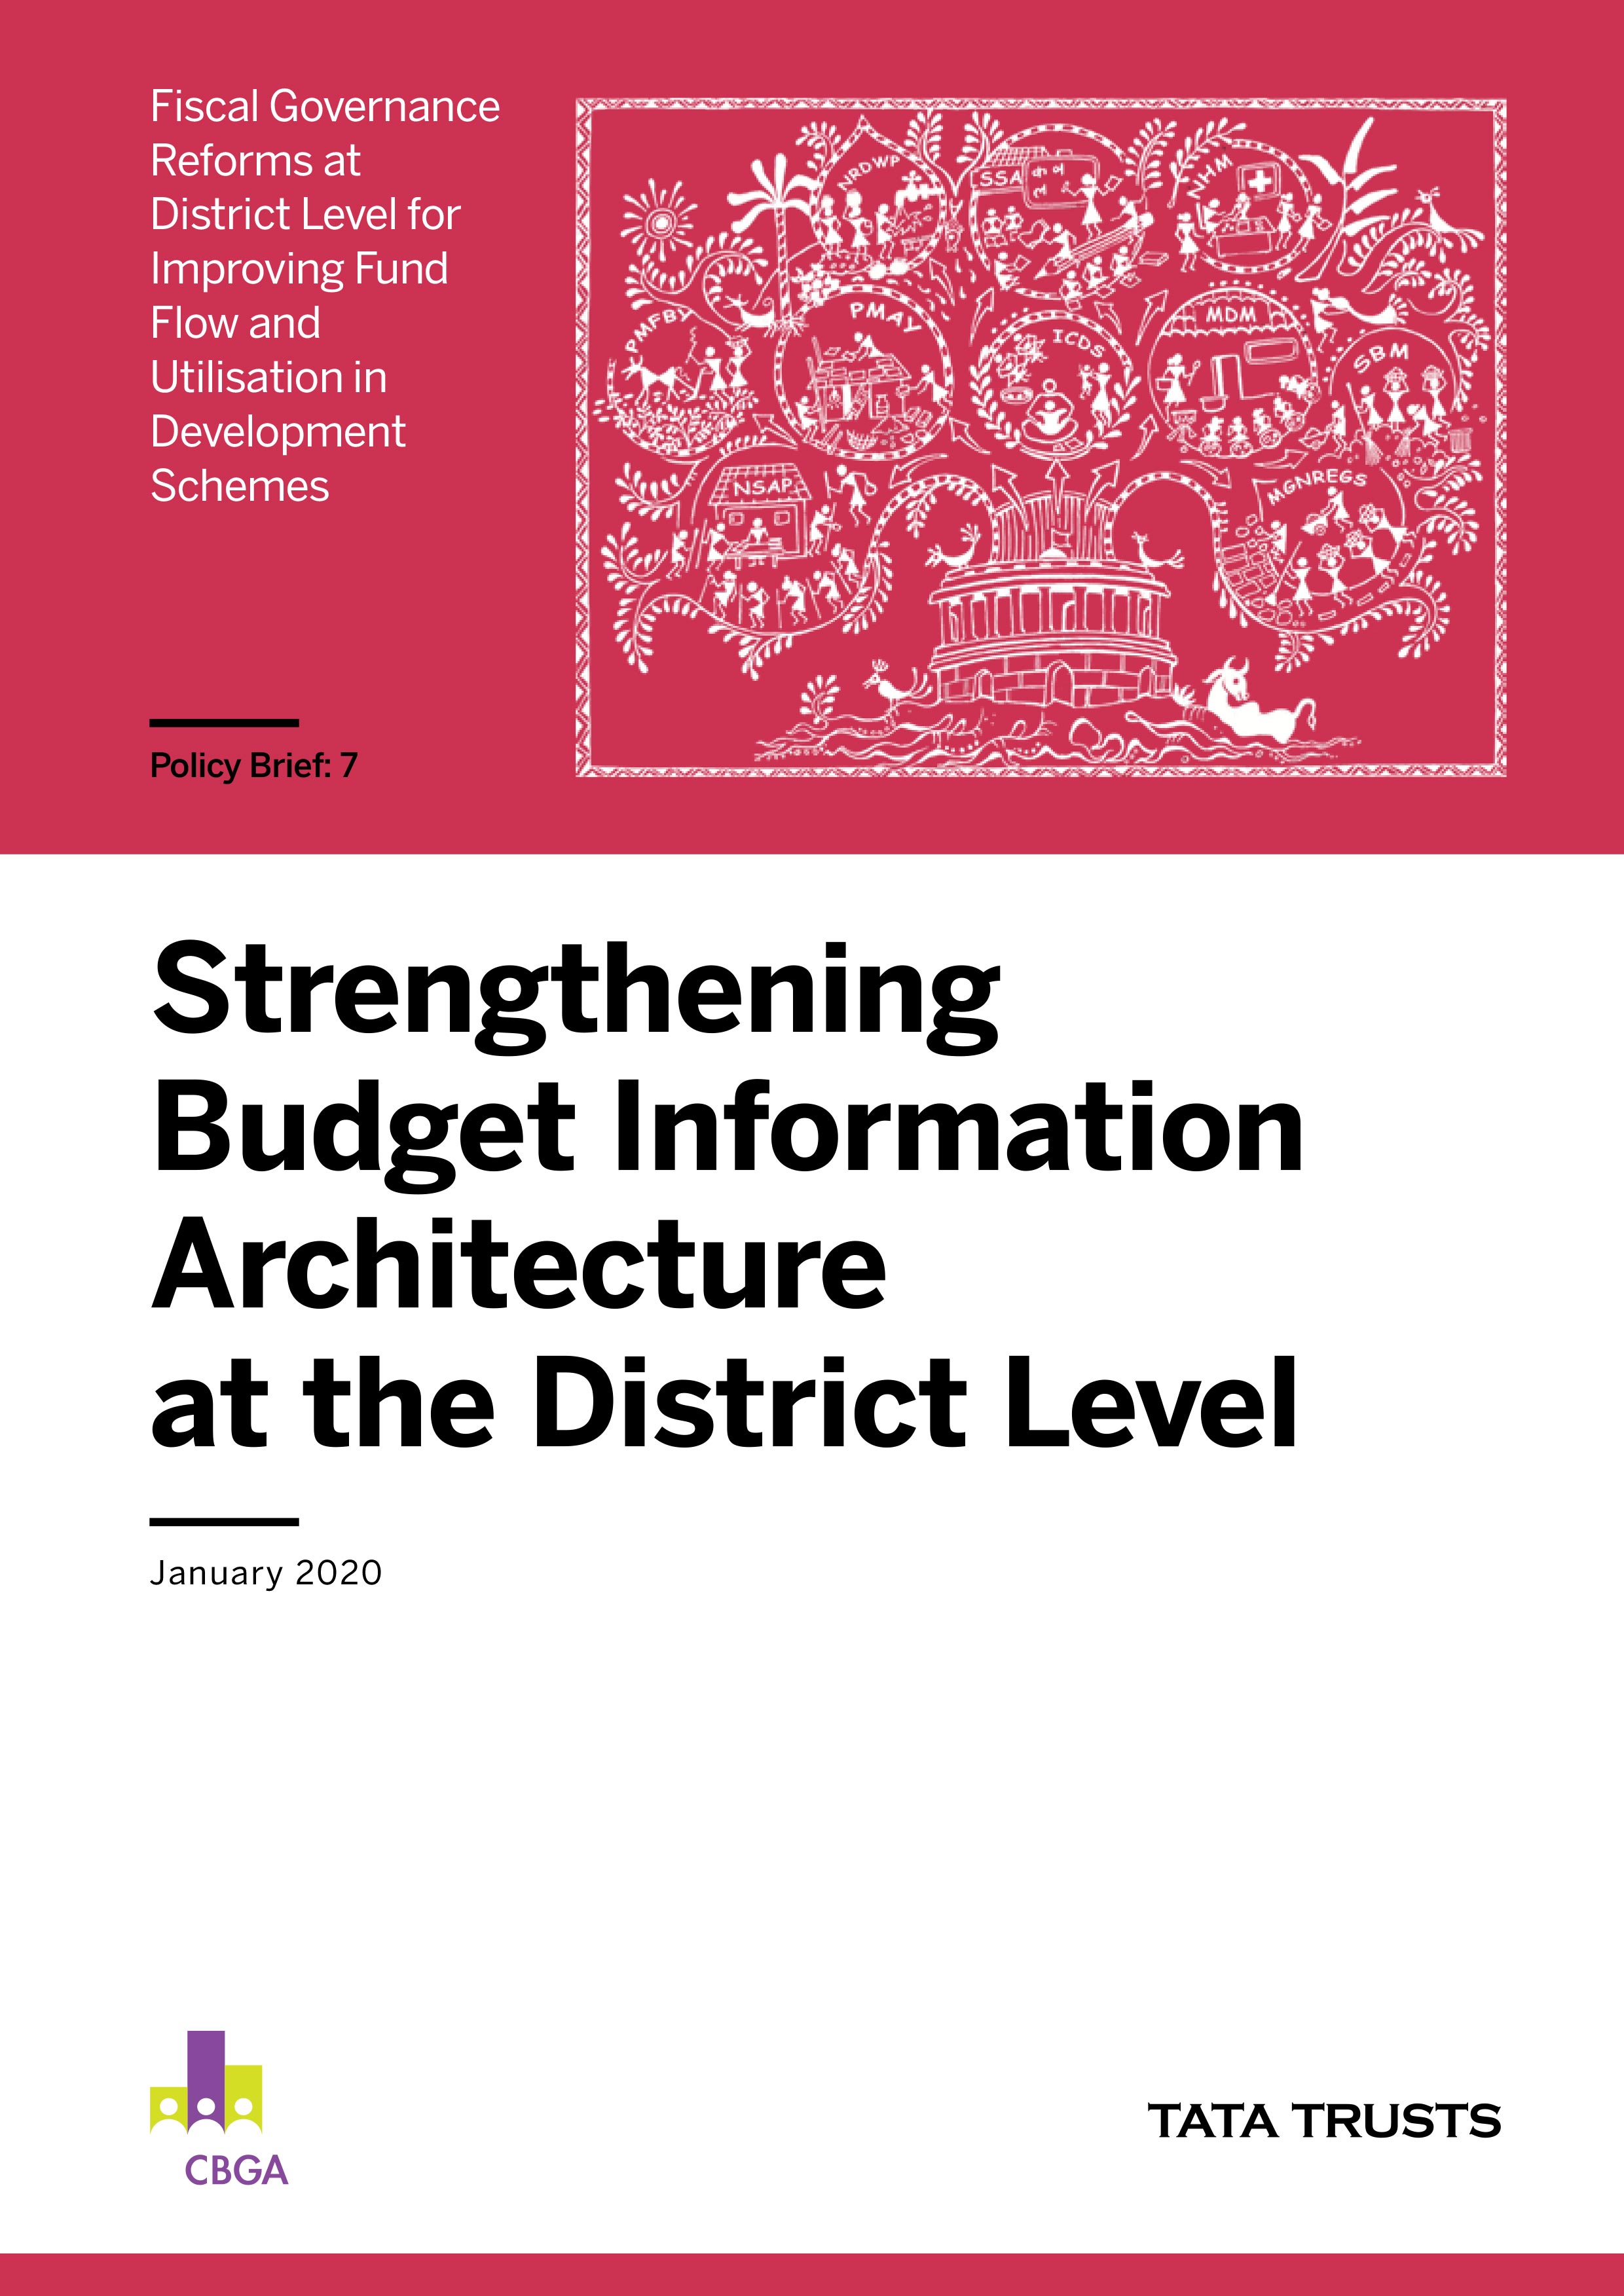 Budget and Expenditure Information at District Level-Policy Brief